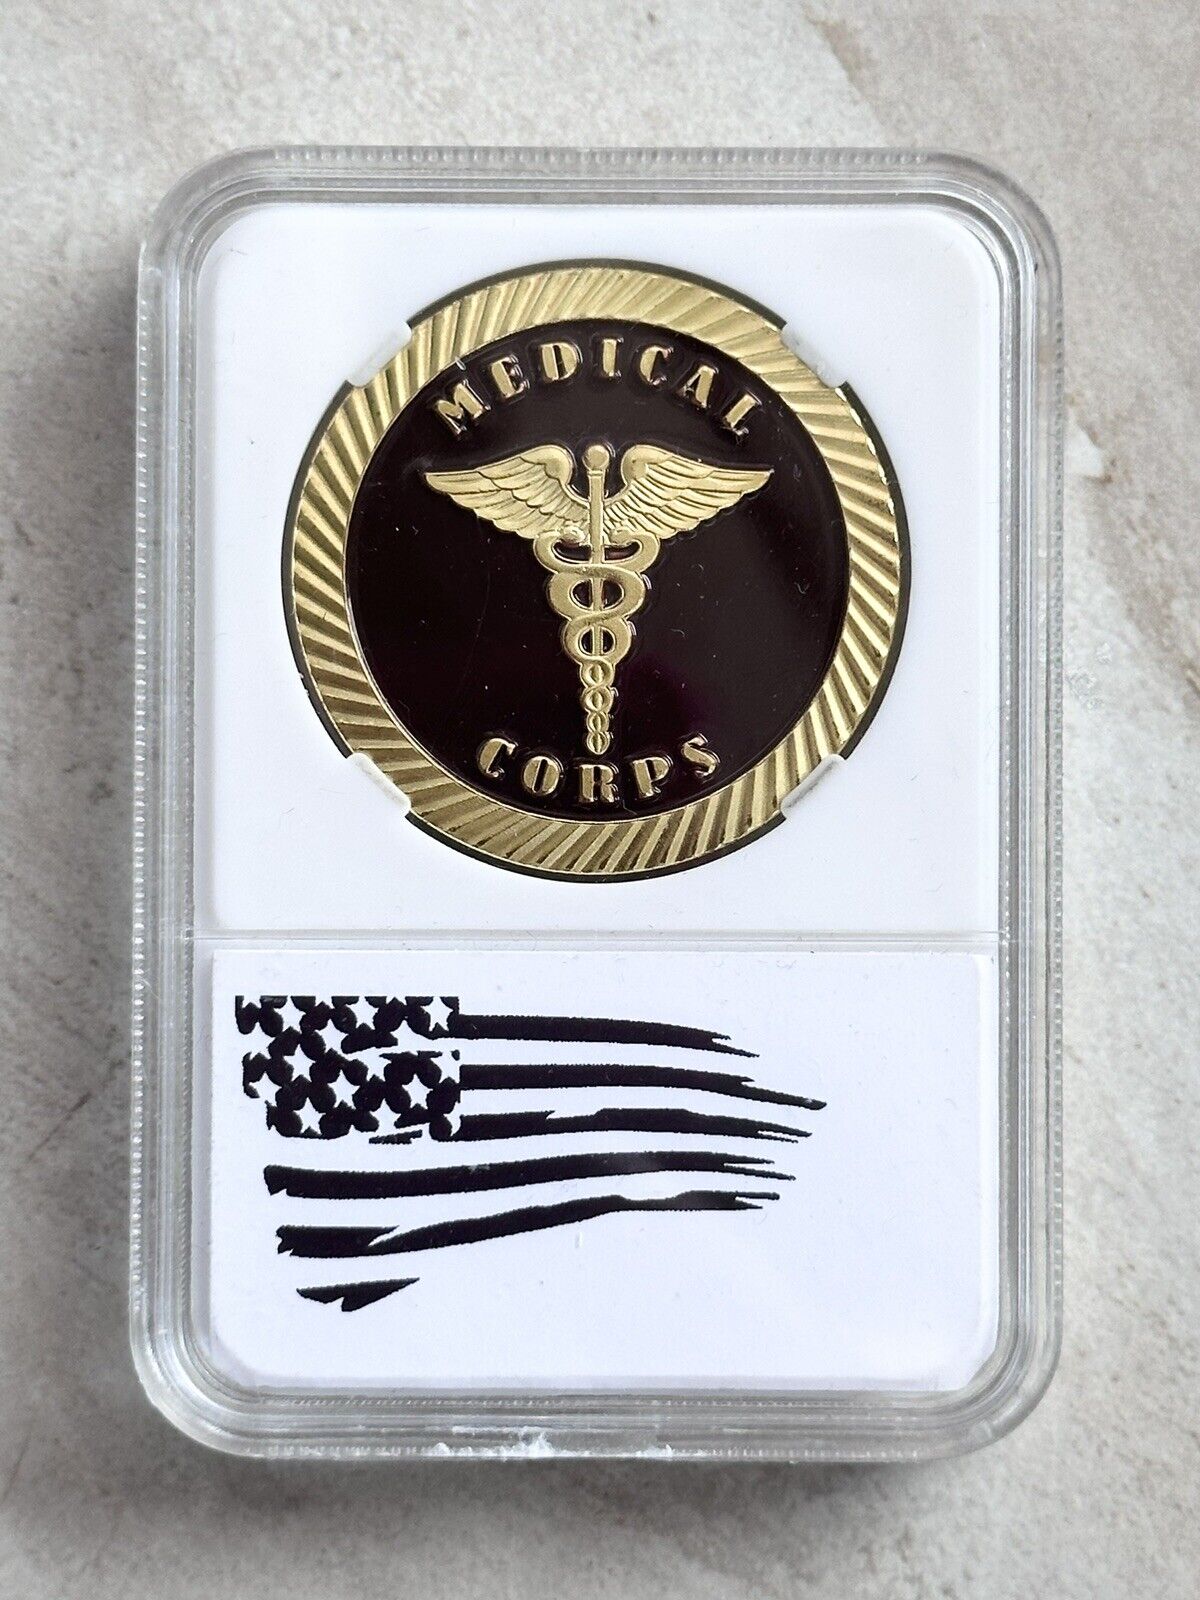 NEW United States U.S. Army Medical Services Corps Challenge Coin With Case